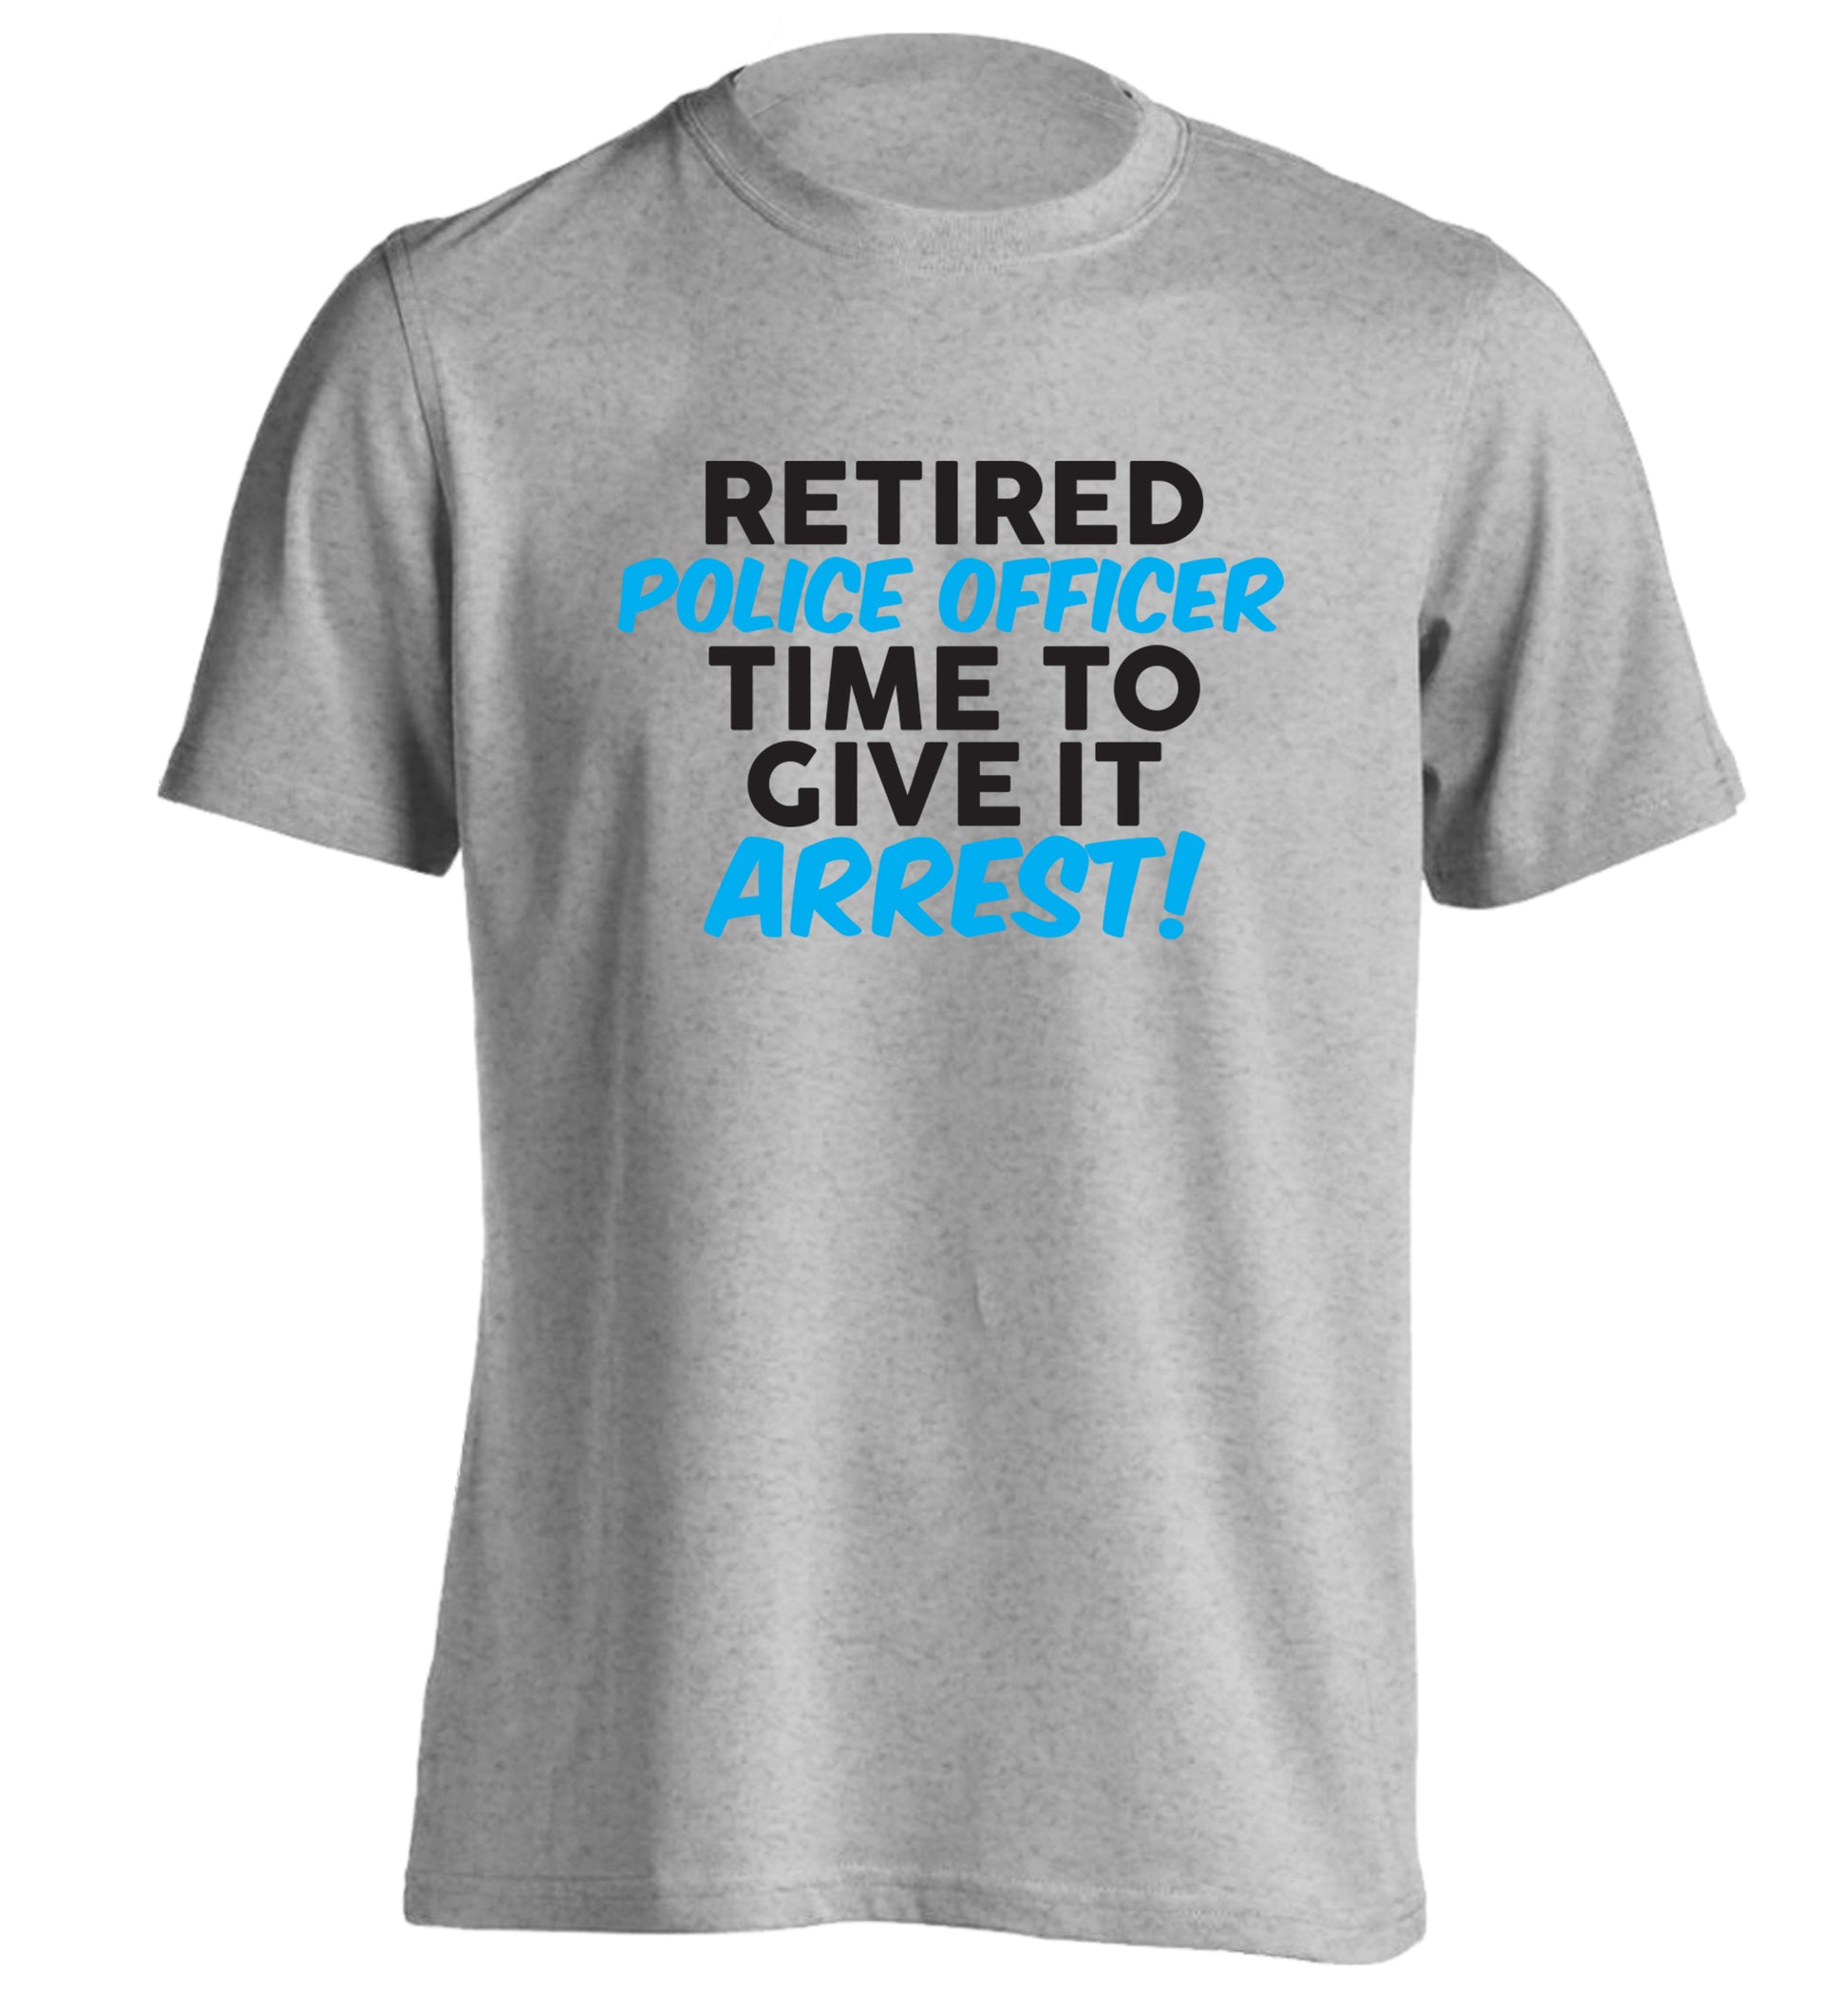 Retired police officer time to give it arrest adults unisex grey Tshirt 2XL